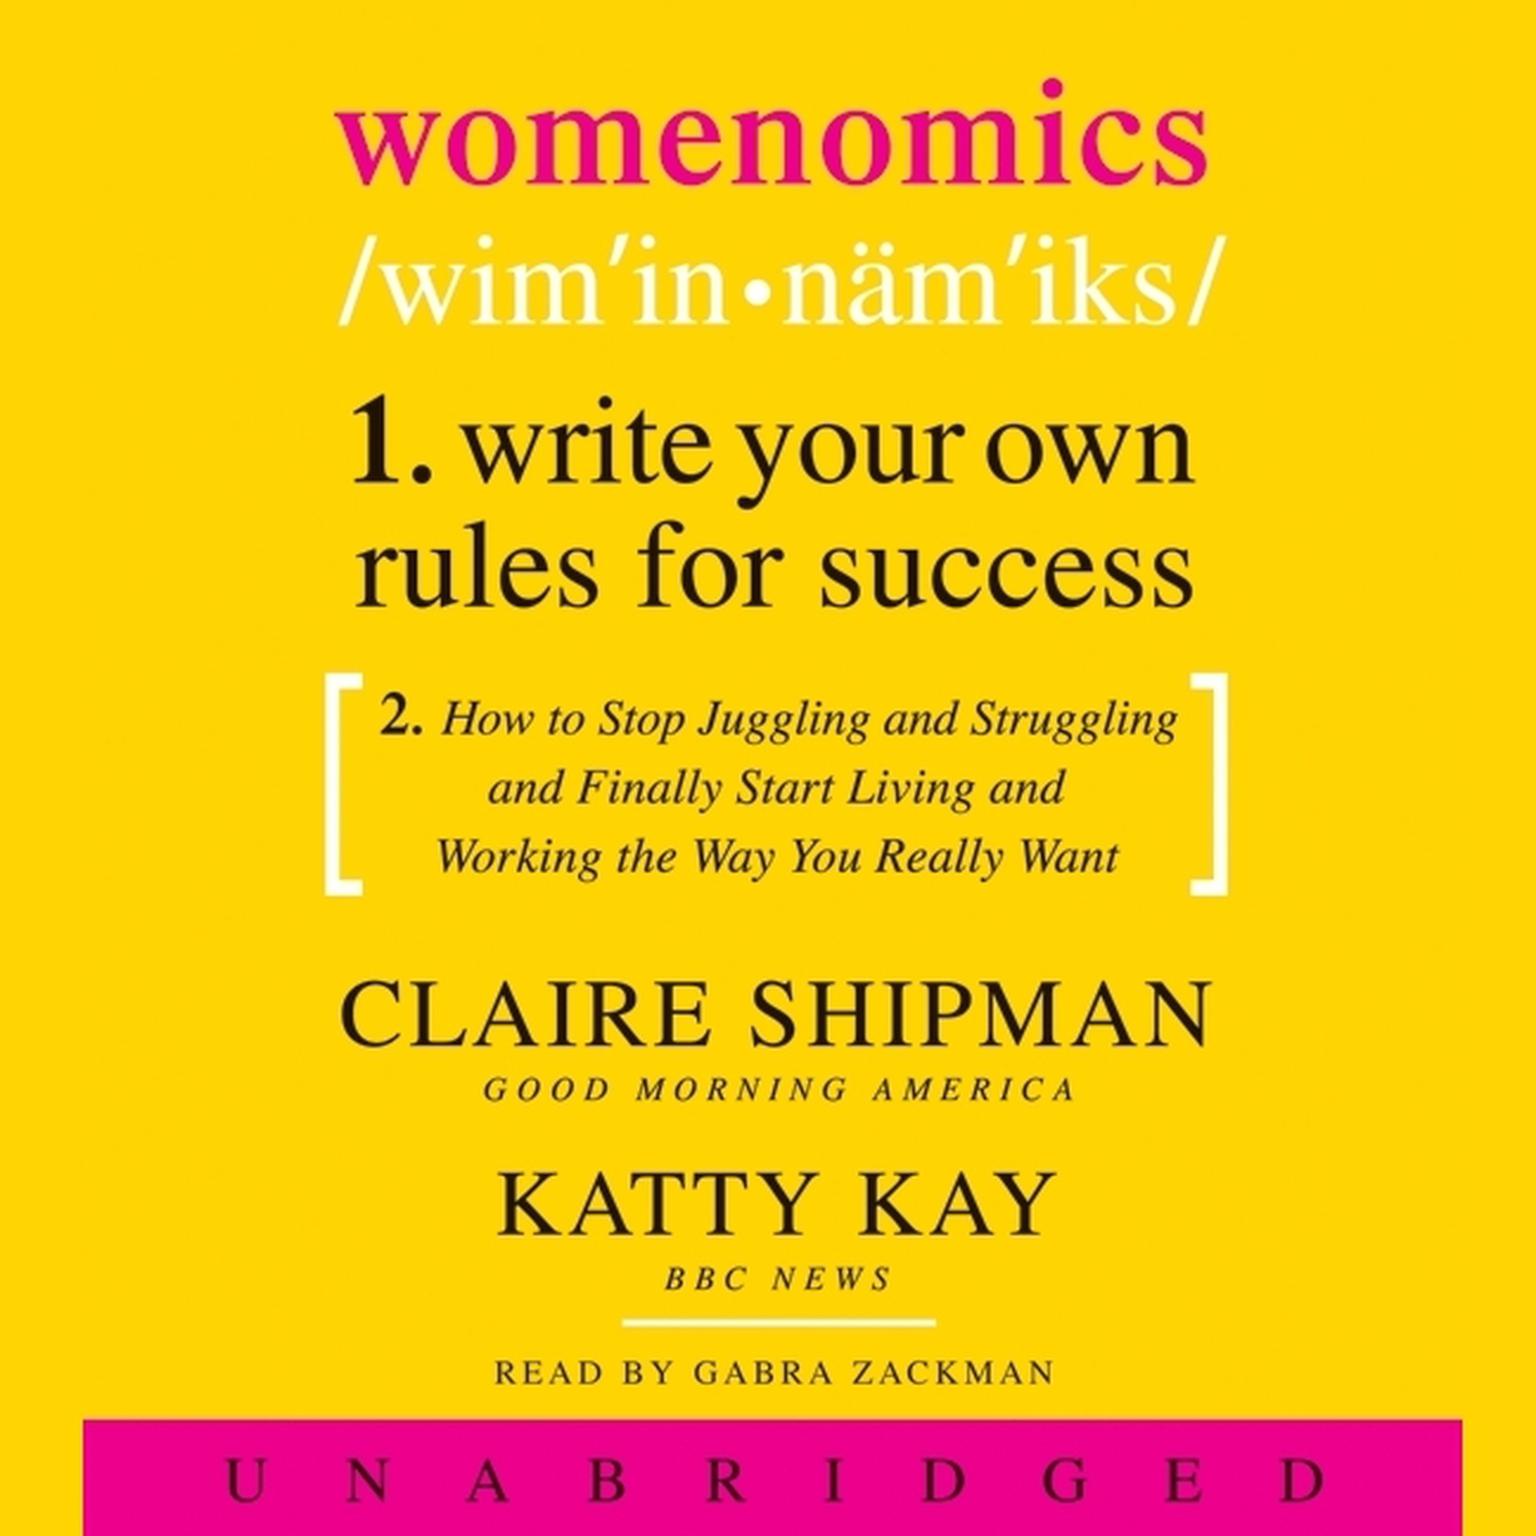 Womenomics: Work Less, Achieve More, Live Better Audiobook, by Claire Shipman